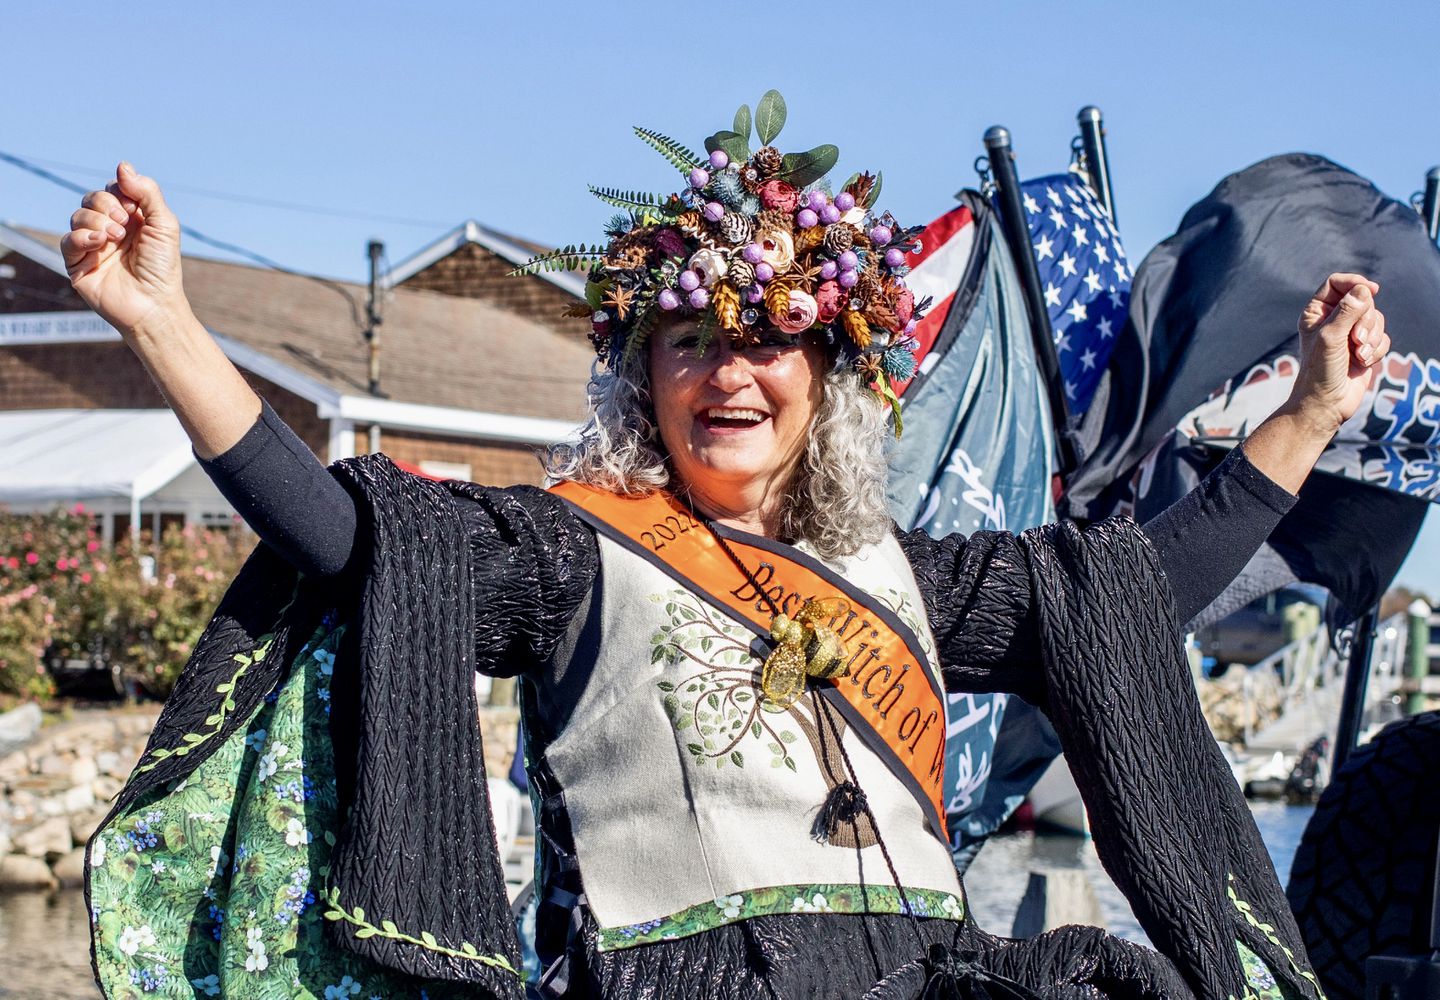 A jubilant Susan Clements celebrates after being named best witch at the 2022 witches parade in Wickford, R.I.